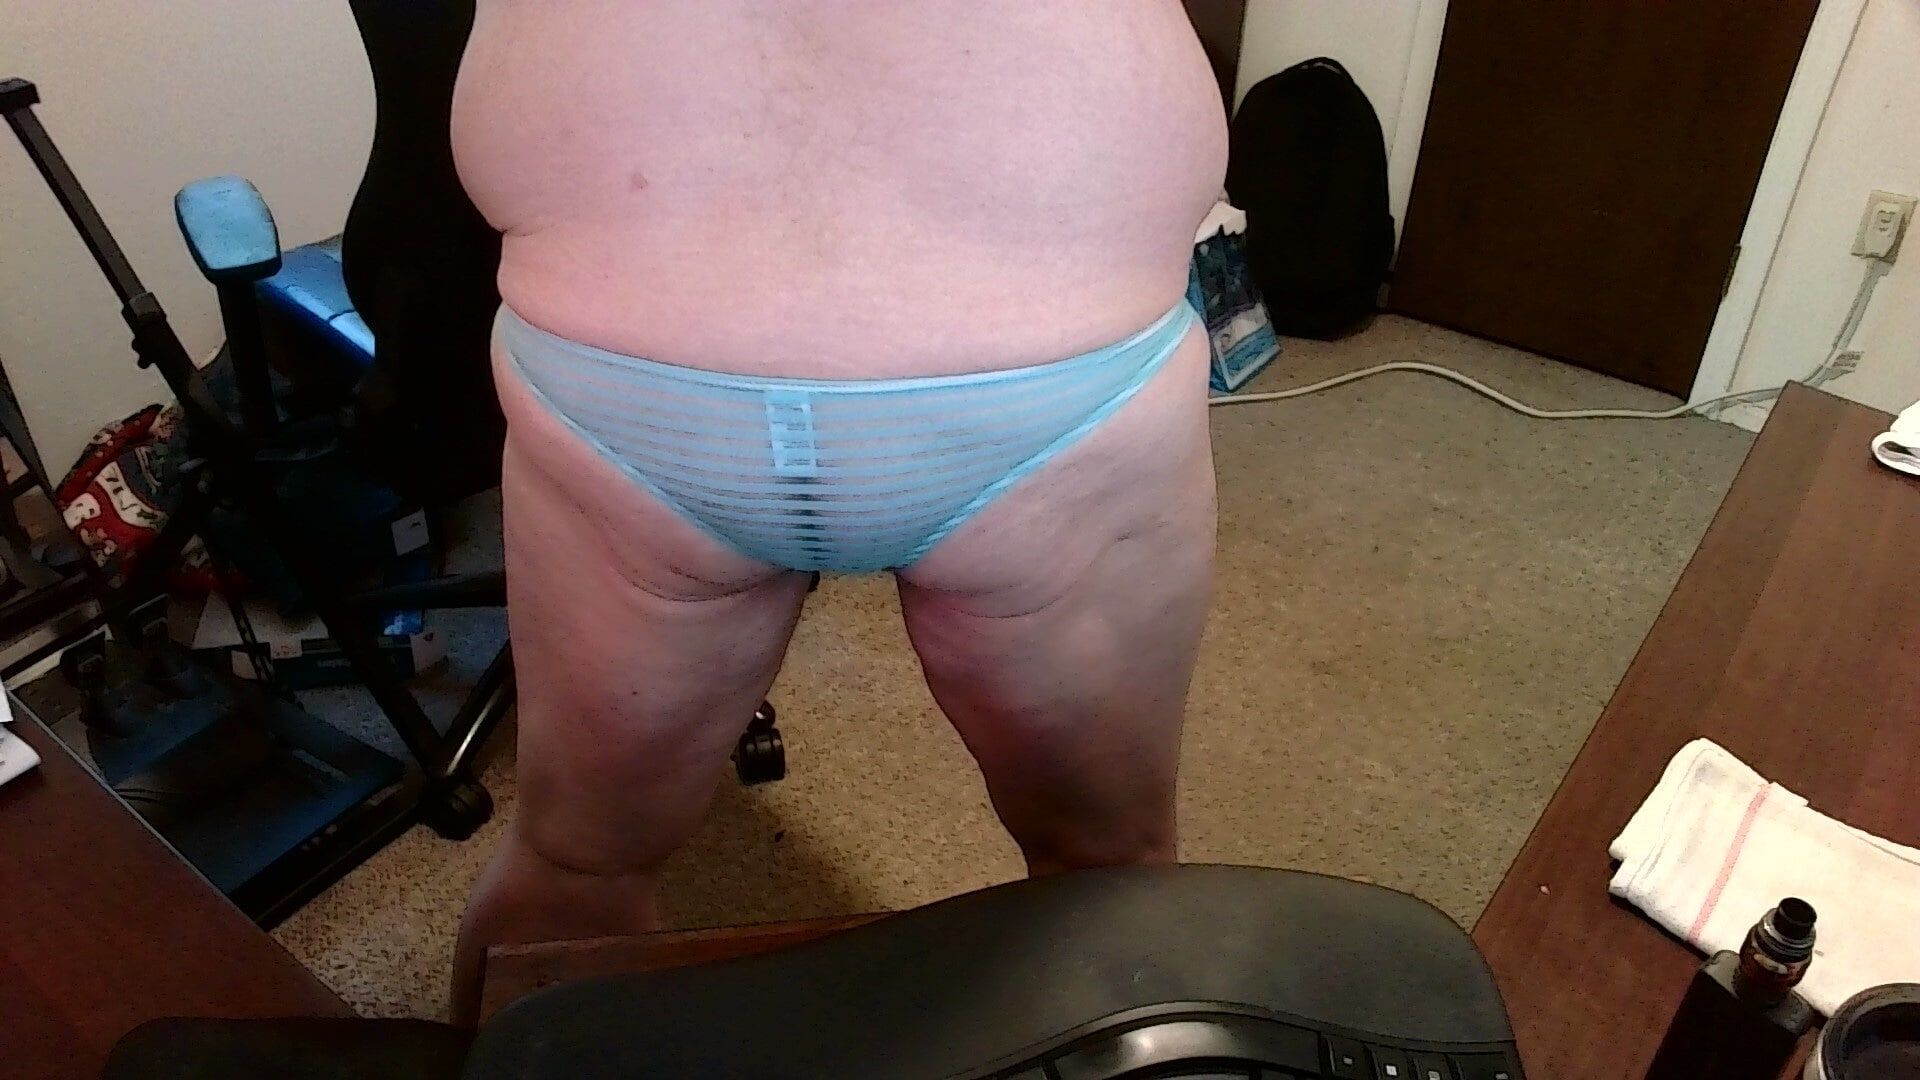 Some new panties that came in this week. #9